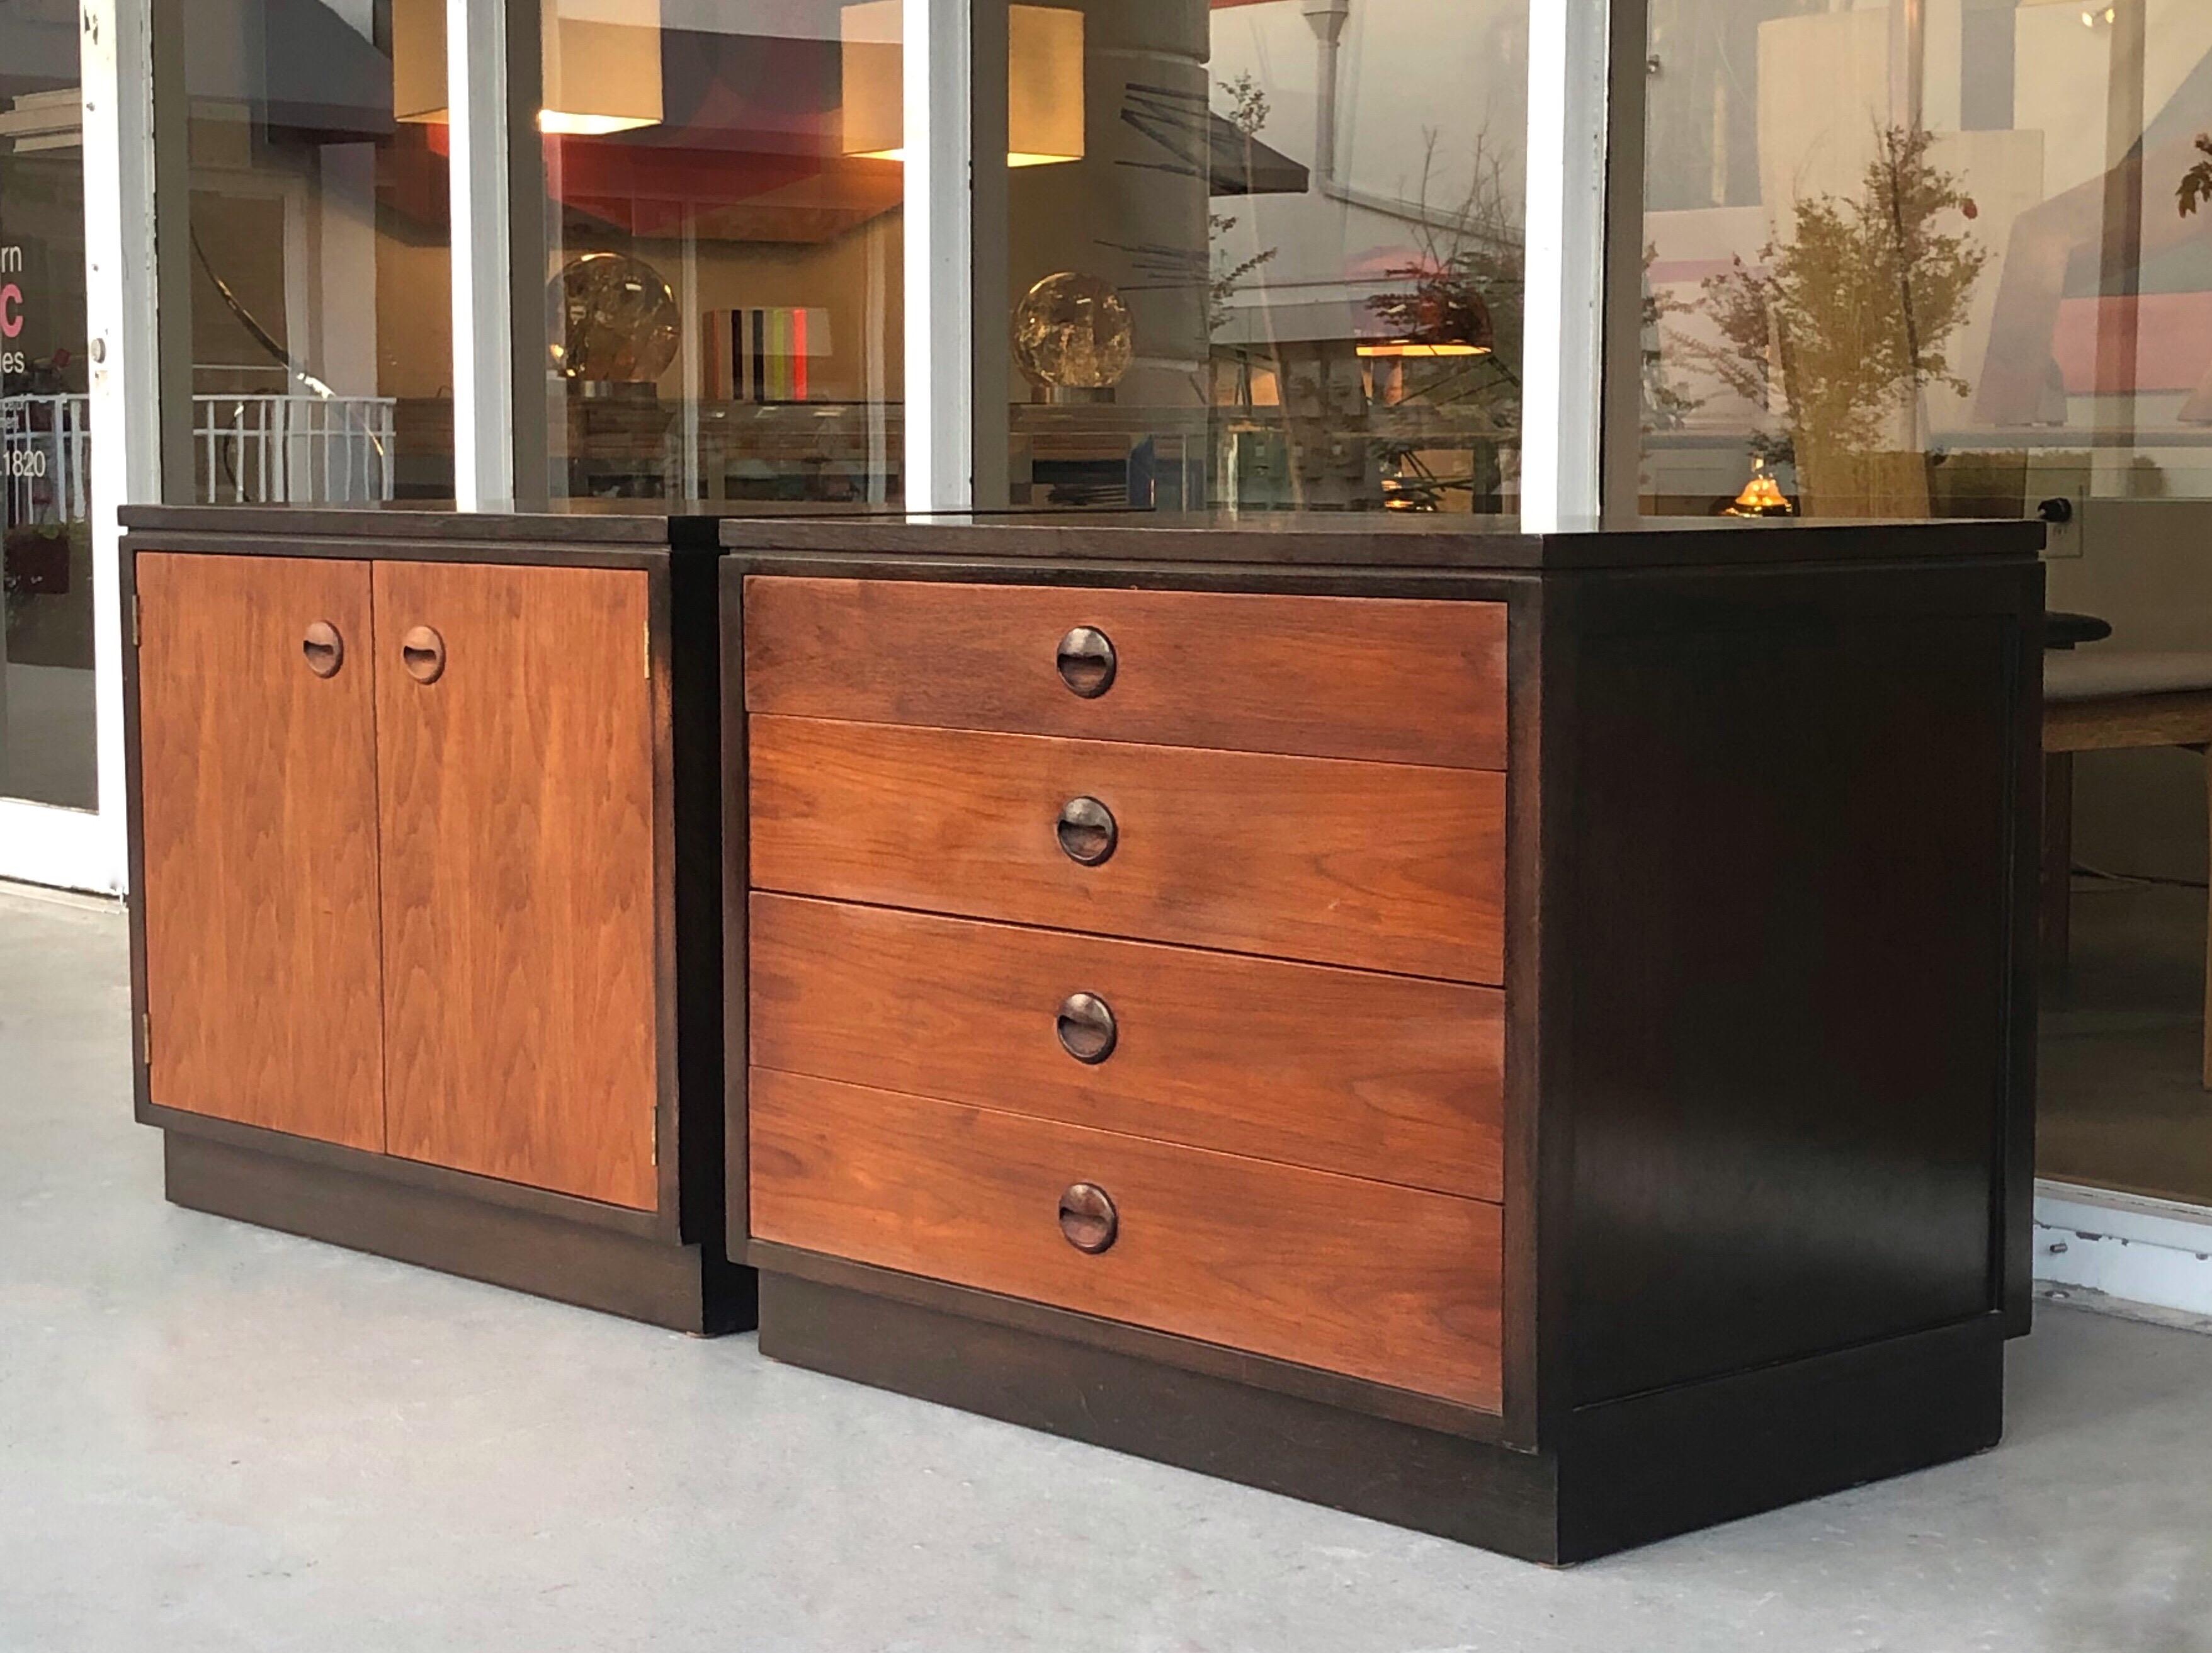 A pair of bedside tables by Dunbar. A very convenient size and design. One has 2 doors that reveal an adjustable shelf. The other one has 4 drawers.